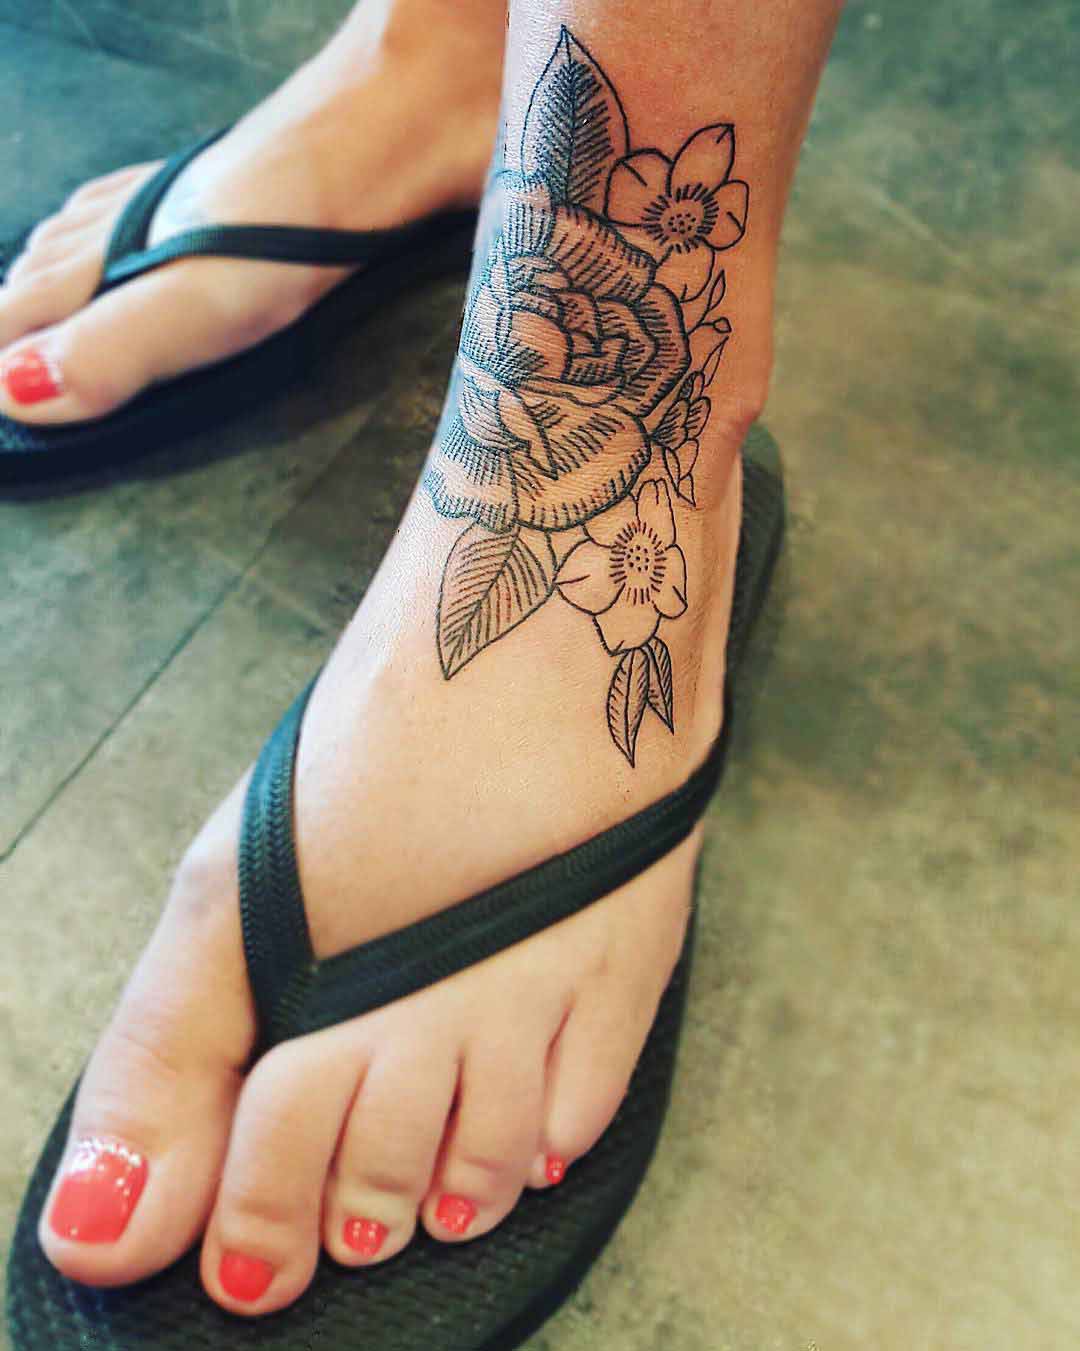 Ankle Band Tattoo | Best Tattoo Ideas Gallery